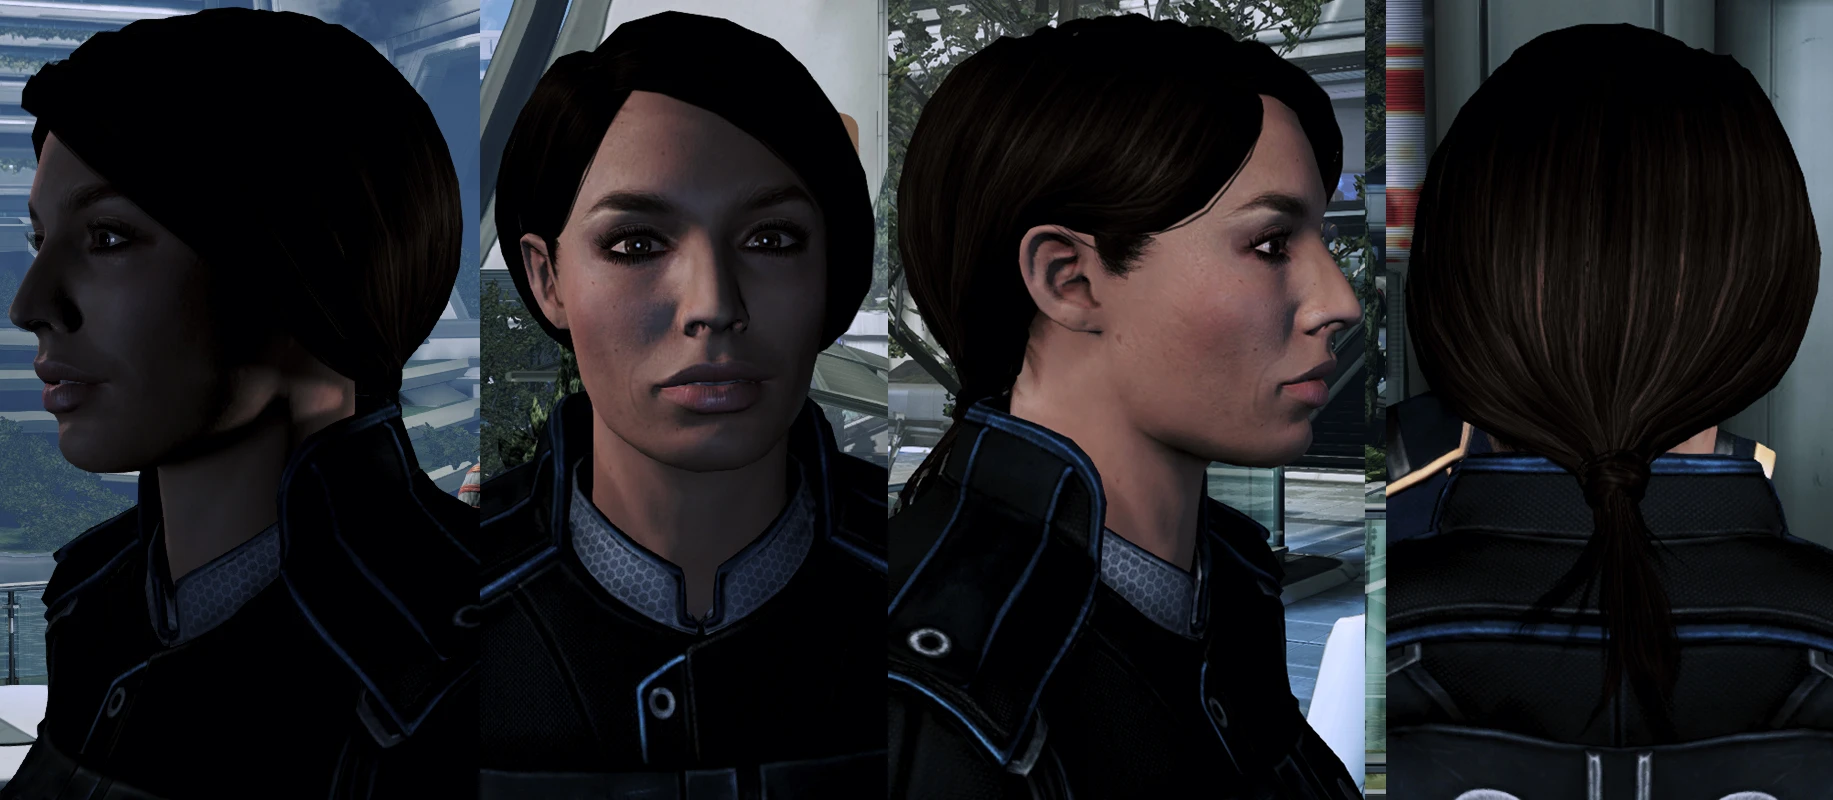 Mass effect 2 hairstyles